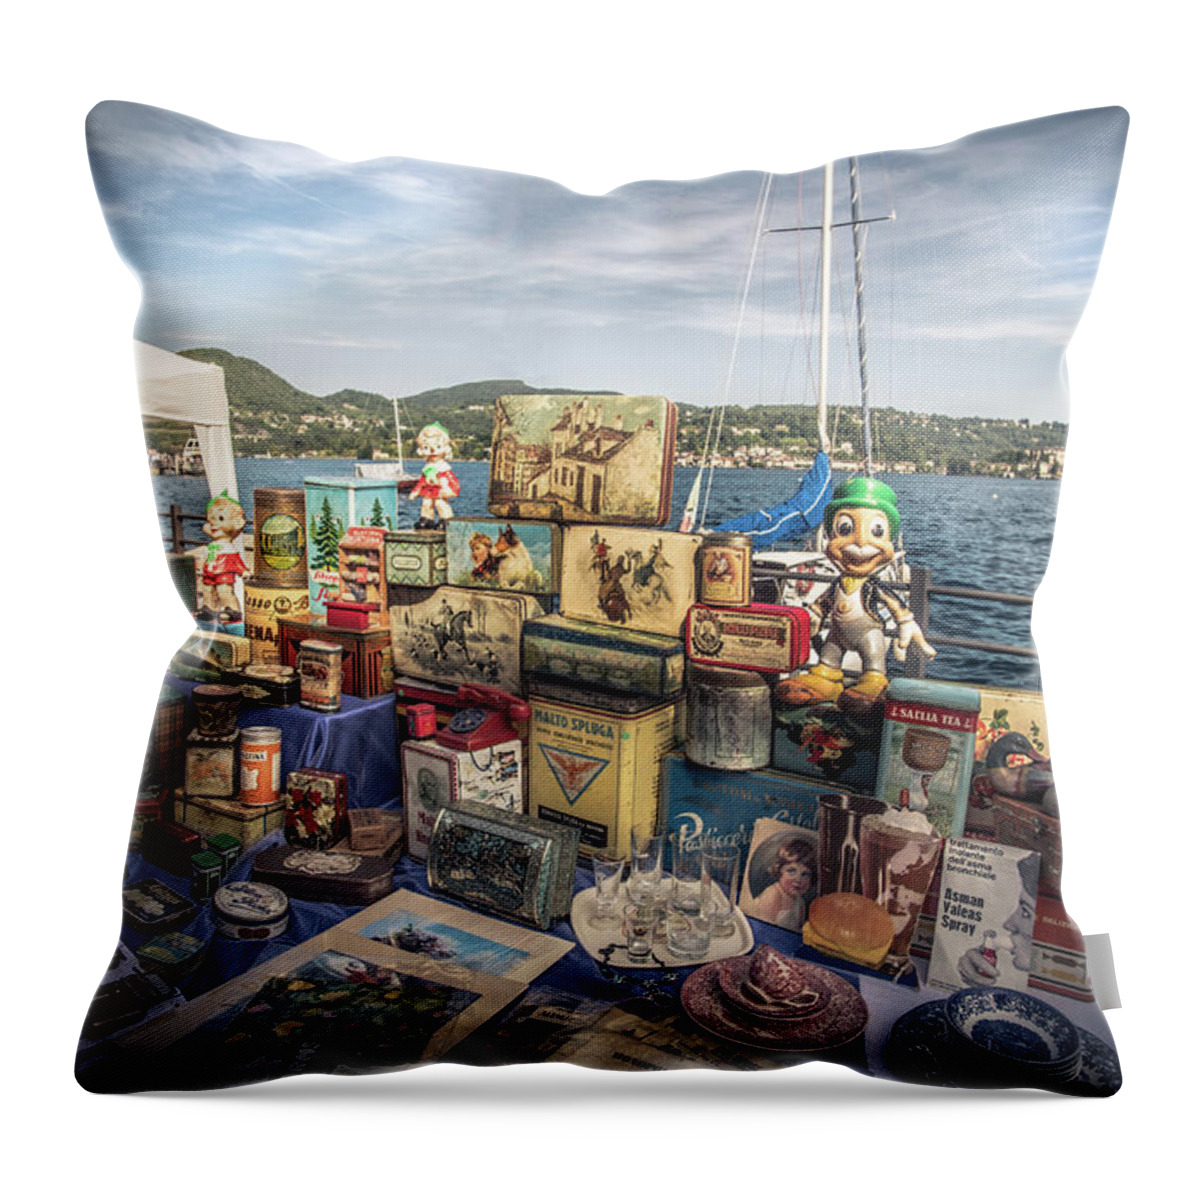 Orta Throw Pillow featuring the photograph Vintage Markeplace Stand On Lake Orta by Luca Lorenzelli